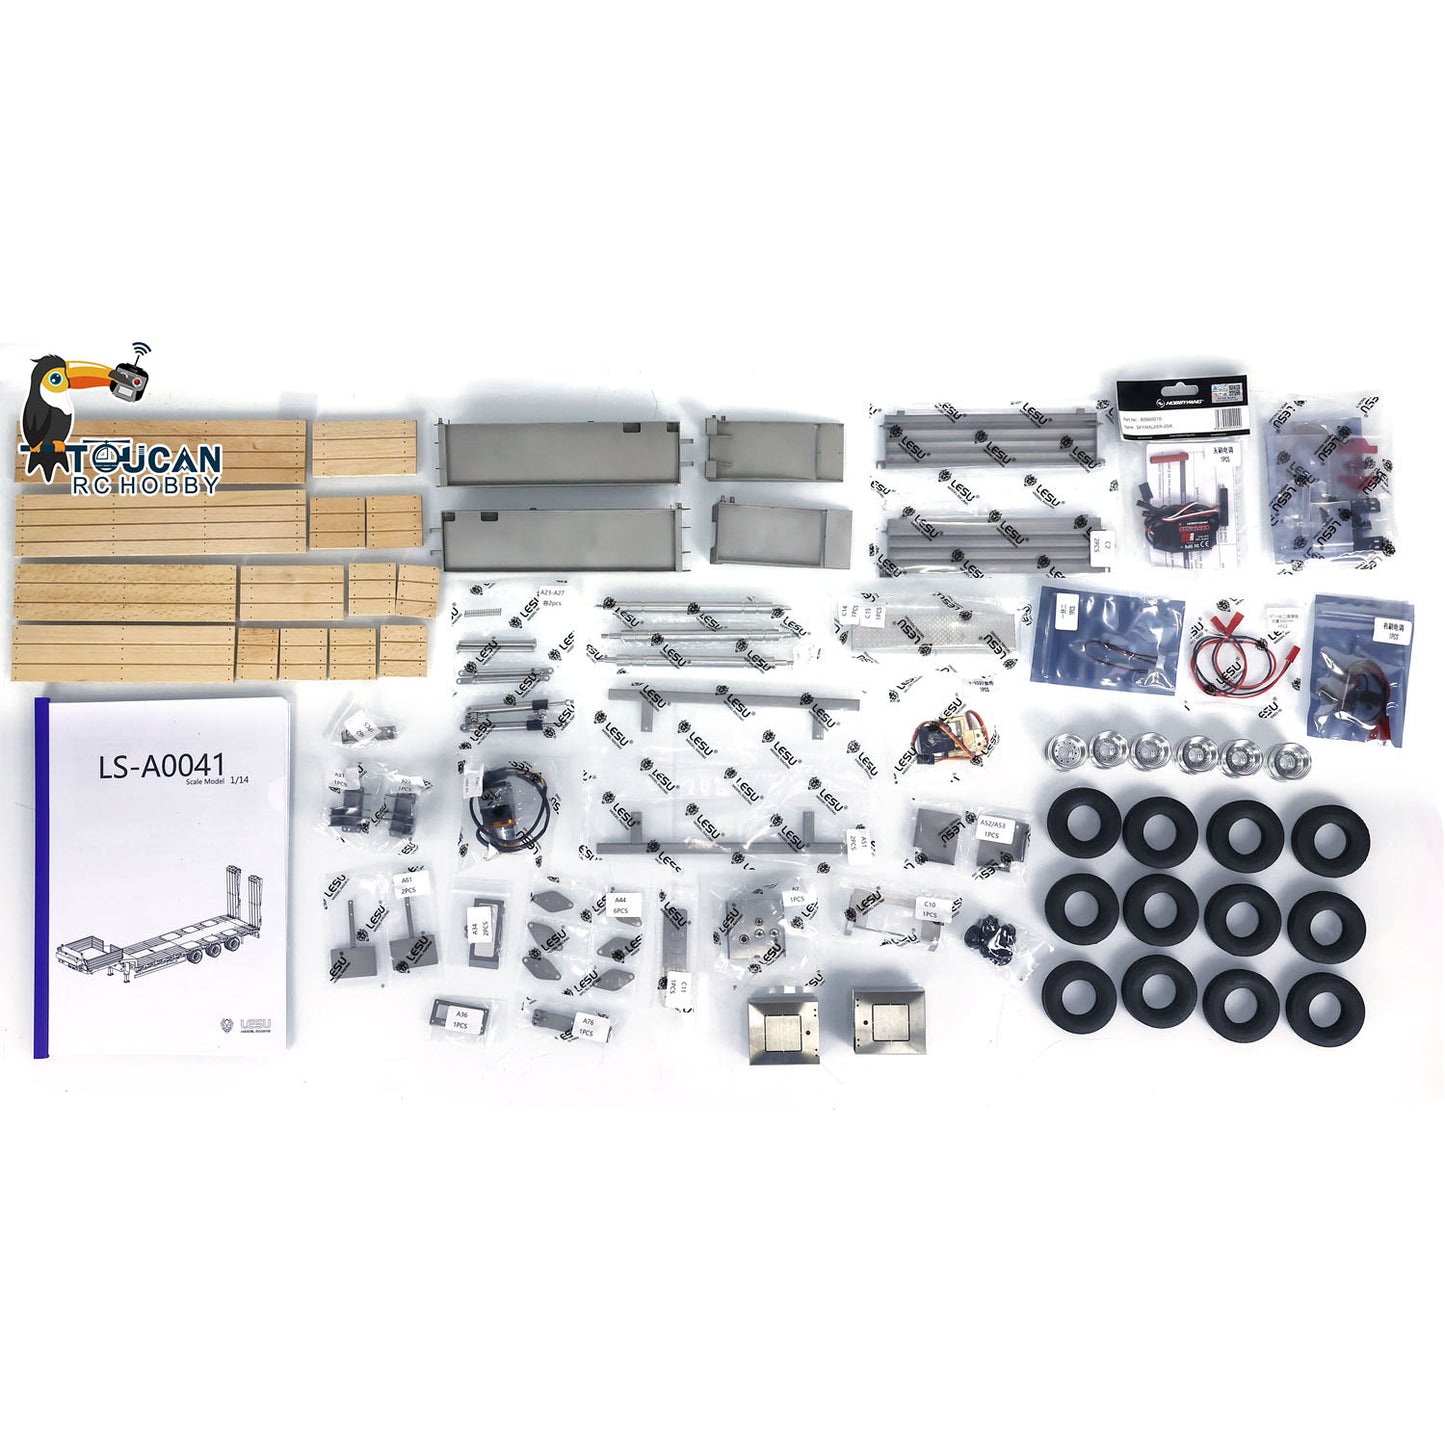 IN STOCK Metal Trailer for LESU 1/14 Hydraulic RC Tractor Radio Control Truck Hobby Model Lifting Tailboard KIT Version